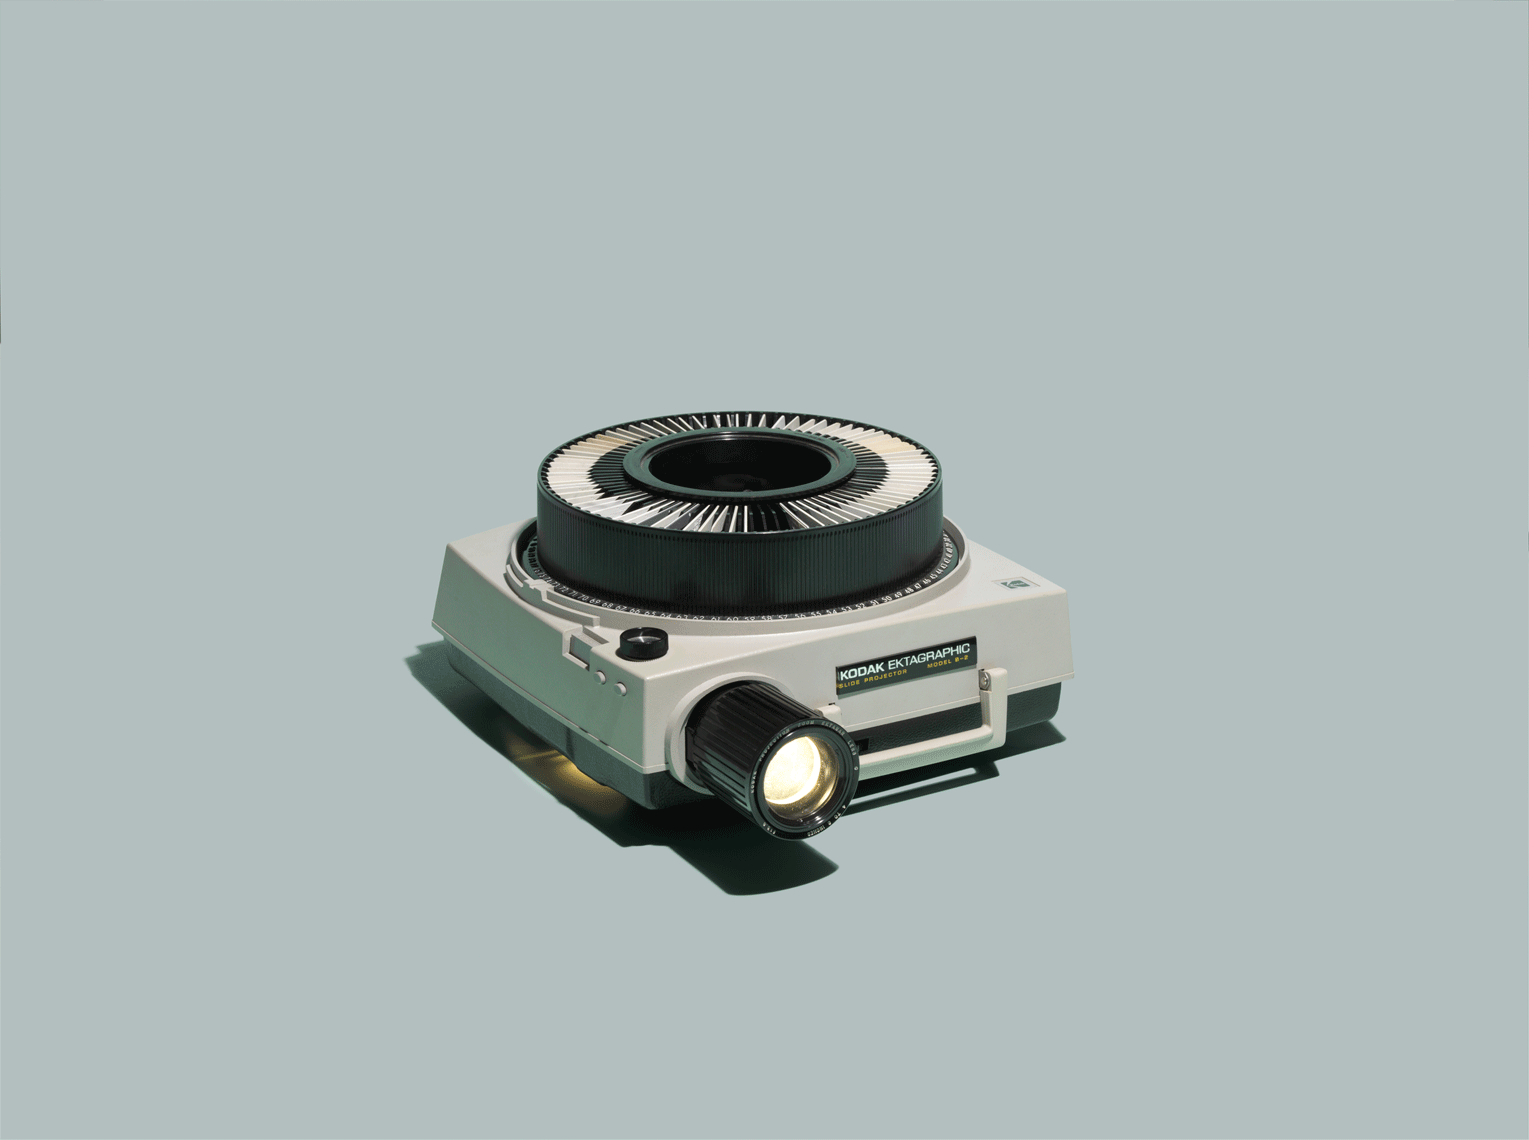 relics_of_technology_slide_projector-copy2